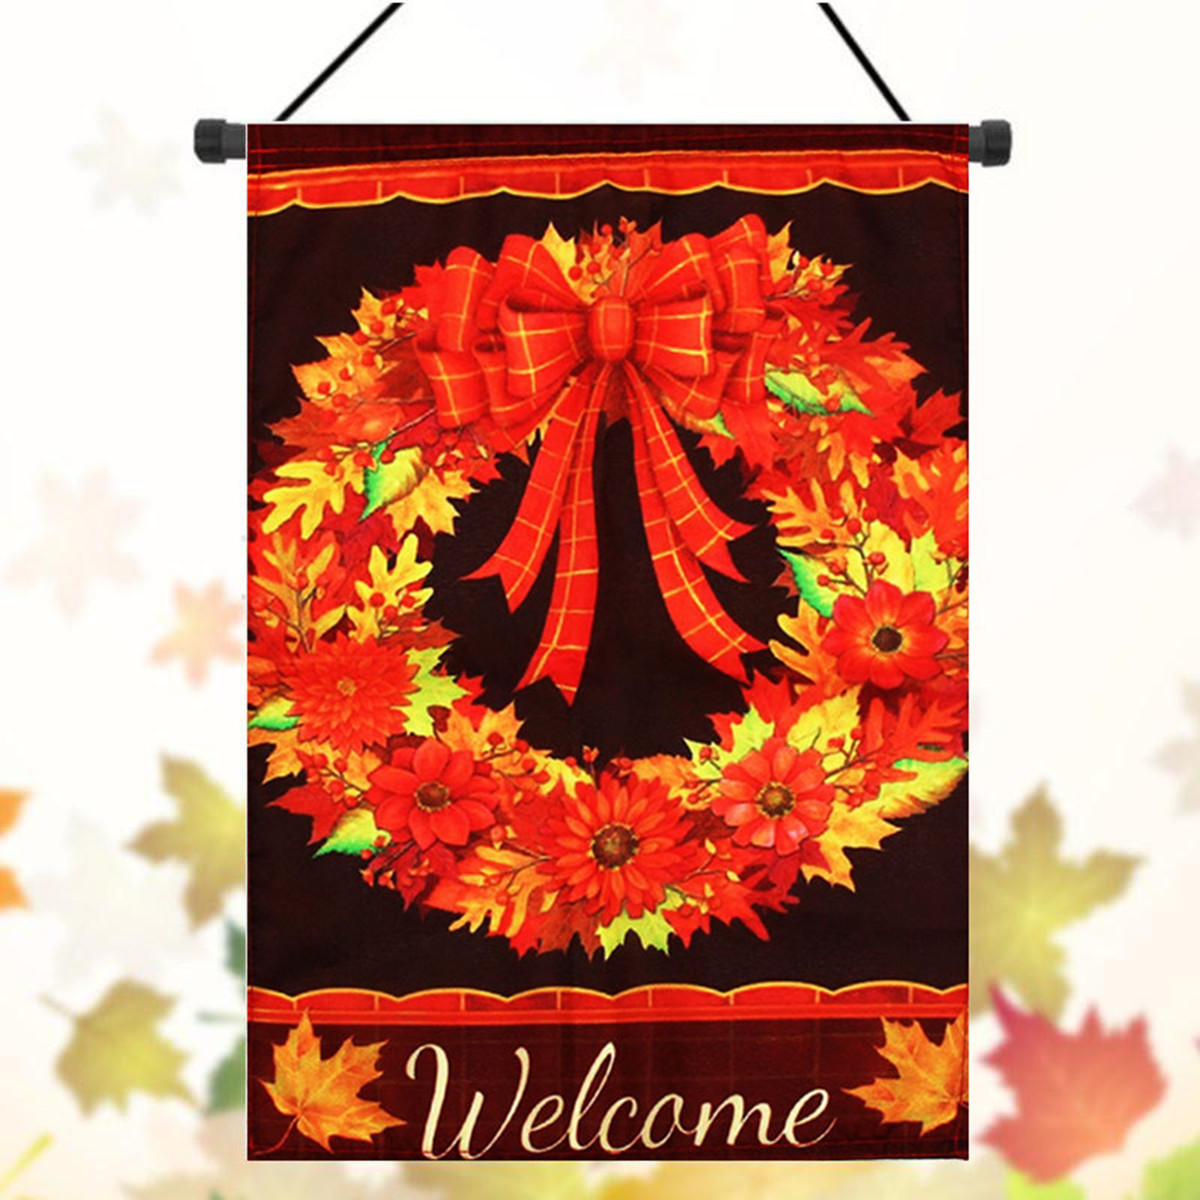 125x18-Fall-Wreath-Garden-Flag-Welcome-Autumn-Leaves-Floral-Briarwood-Lane-Decorations-1343584-1